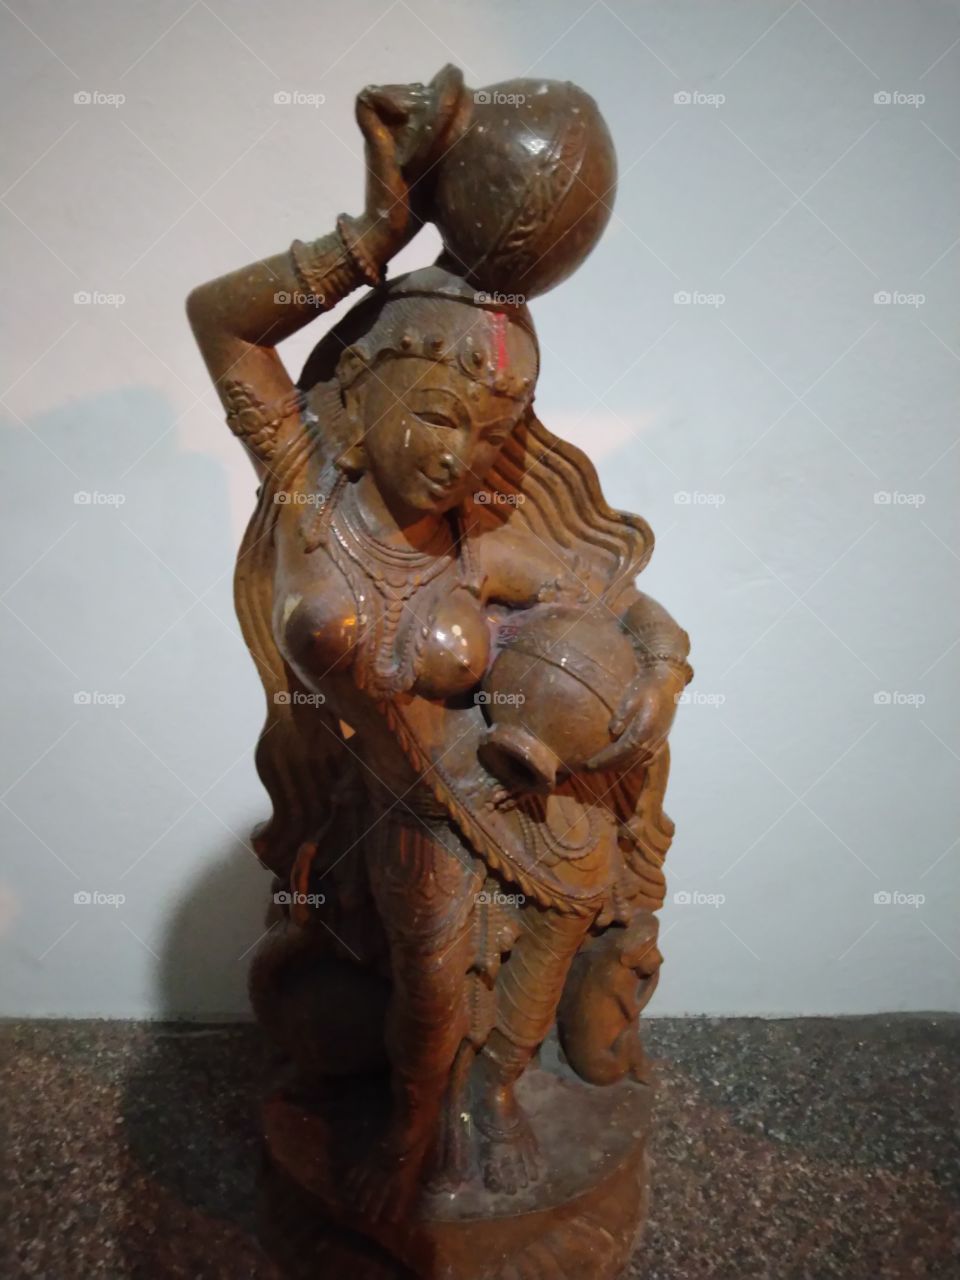 A statue of a mother & child